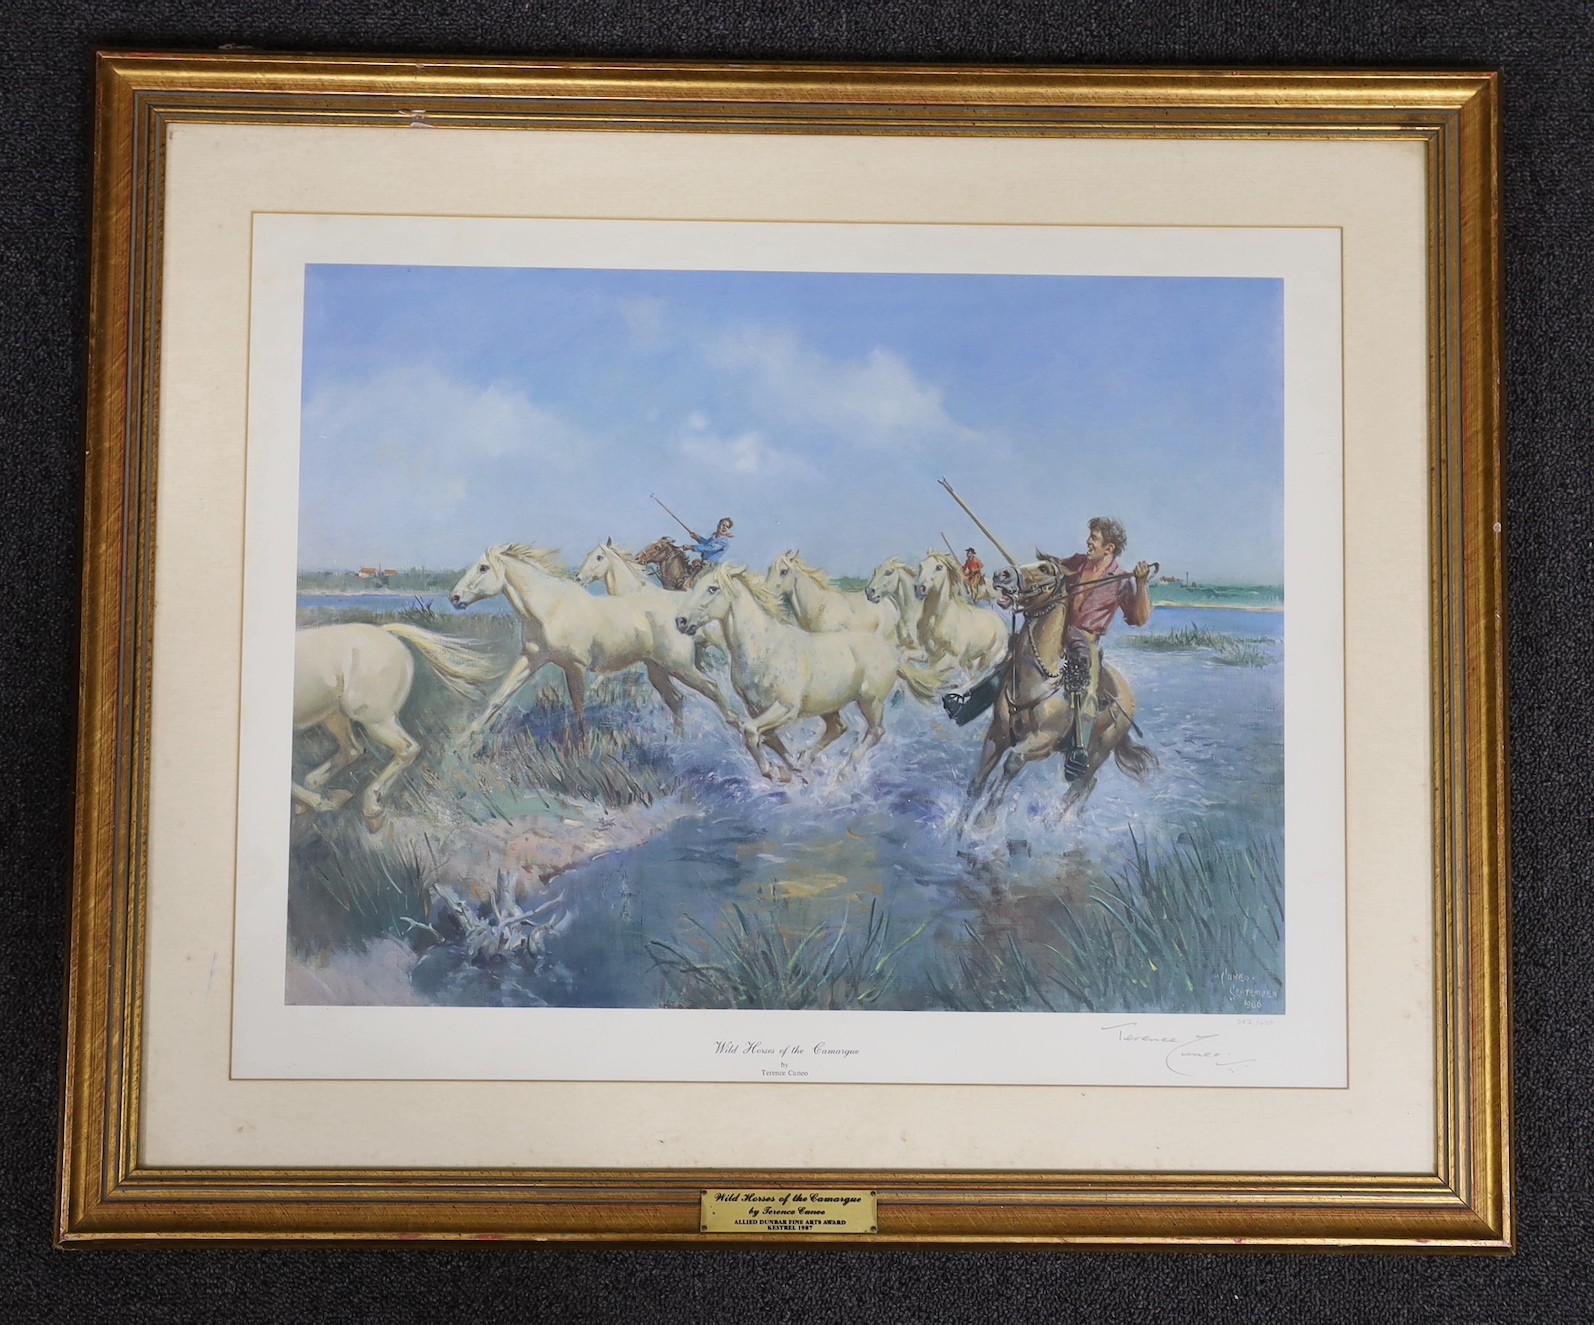 Terence Cuneo, limited edition print, 'Wild Horses of The Camargue', signed in pencil, 382/420, 39 x 52cm